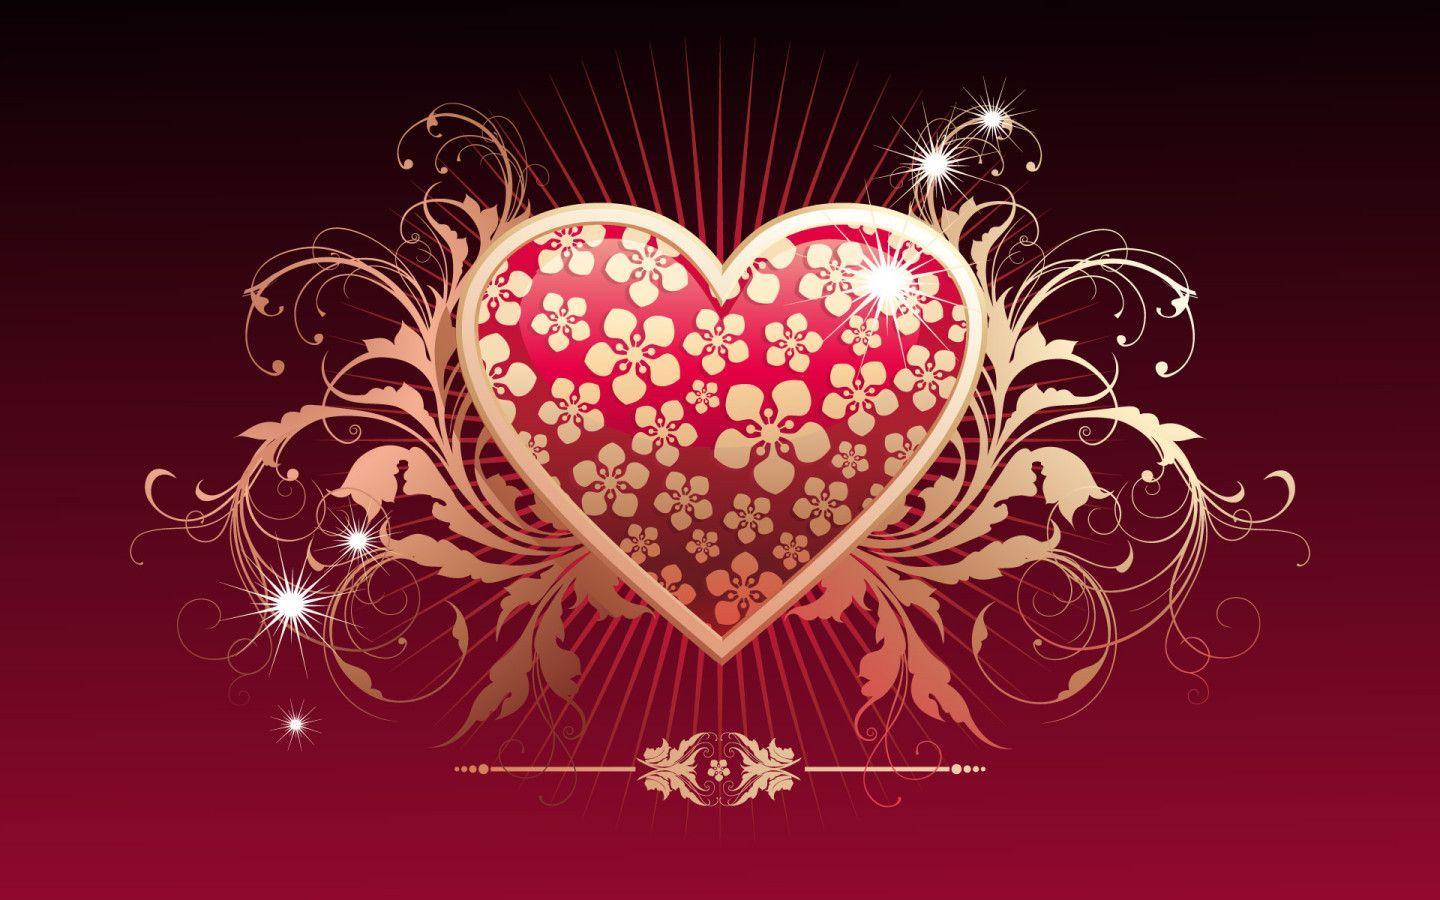 Hearts Online for windows download free